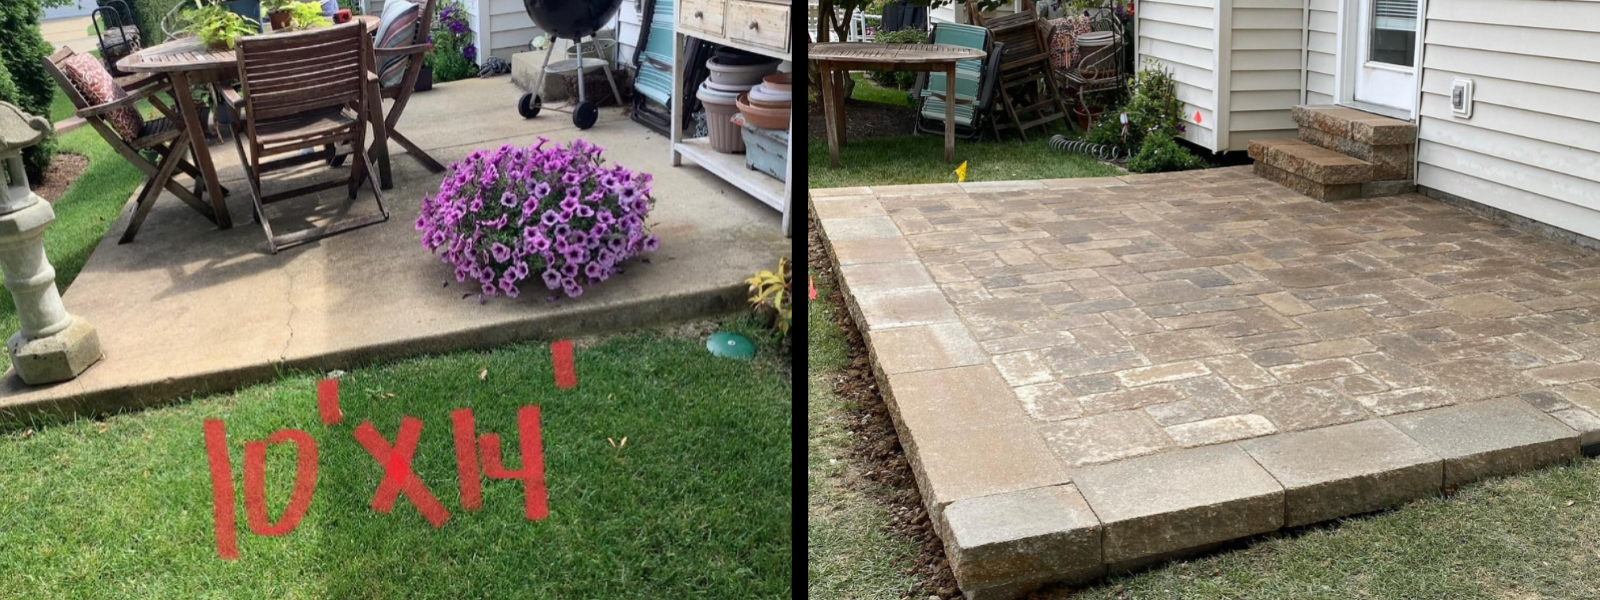 Big Bend Landscaping remove landscaping add tandem stone wall around patio